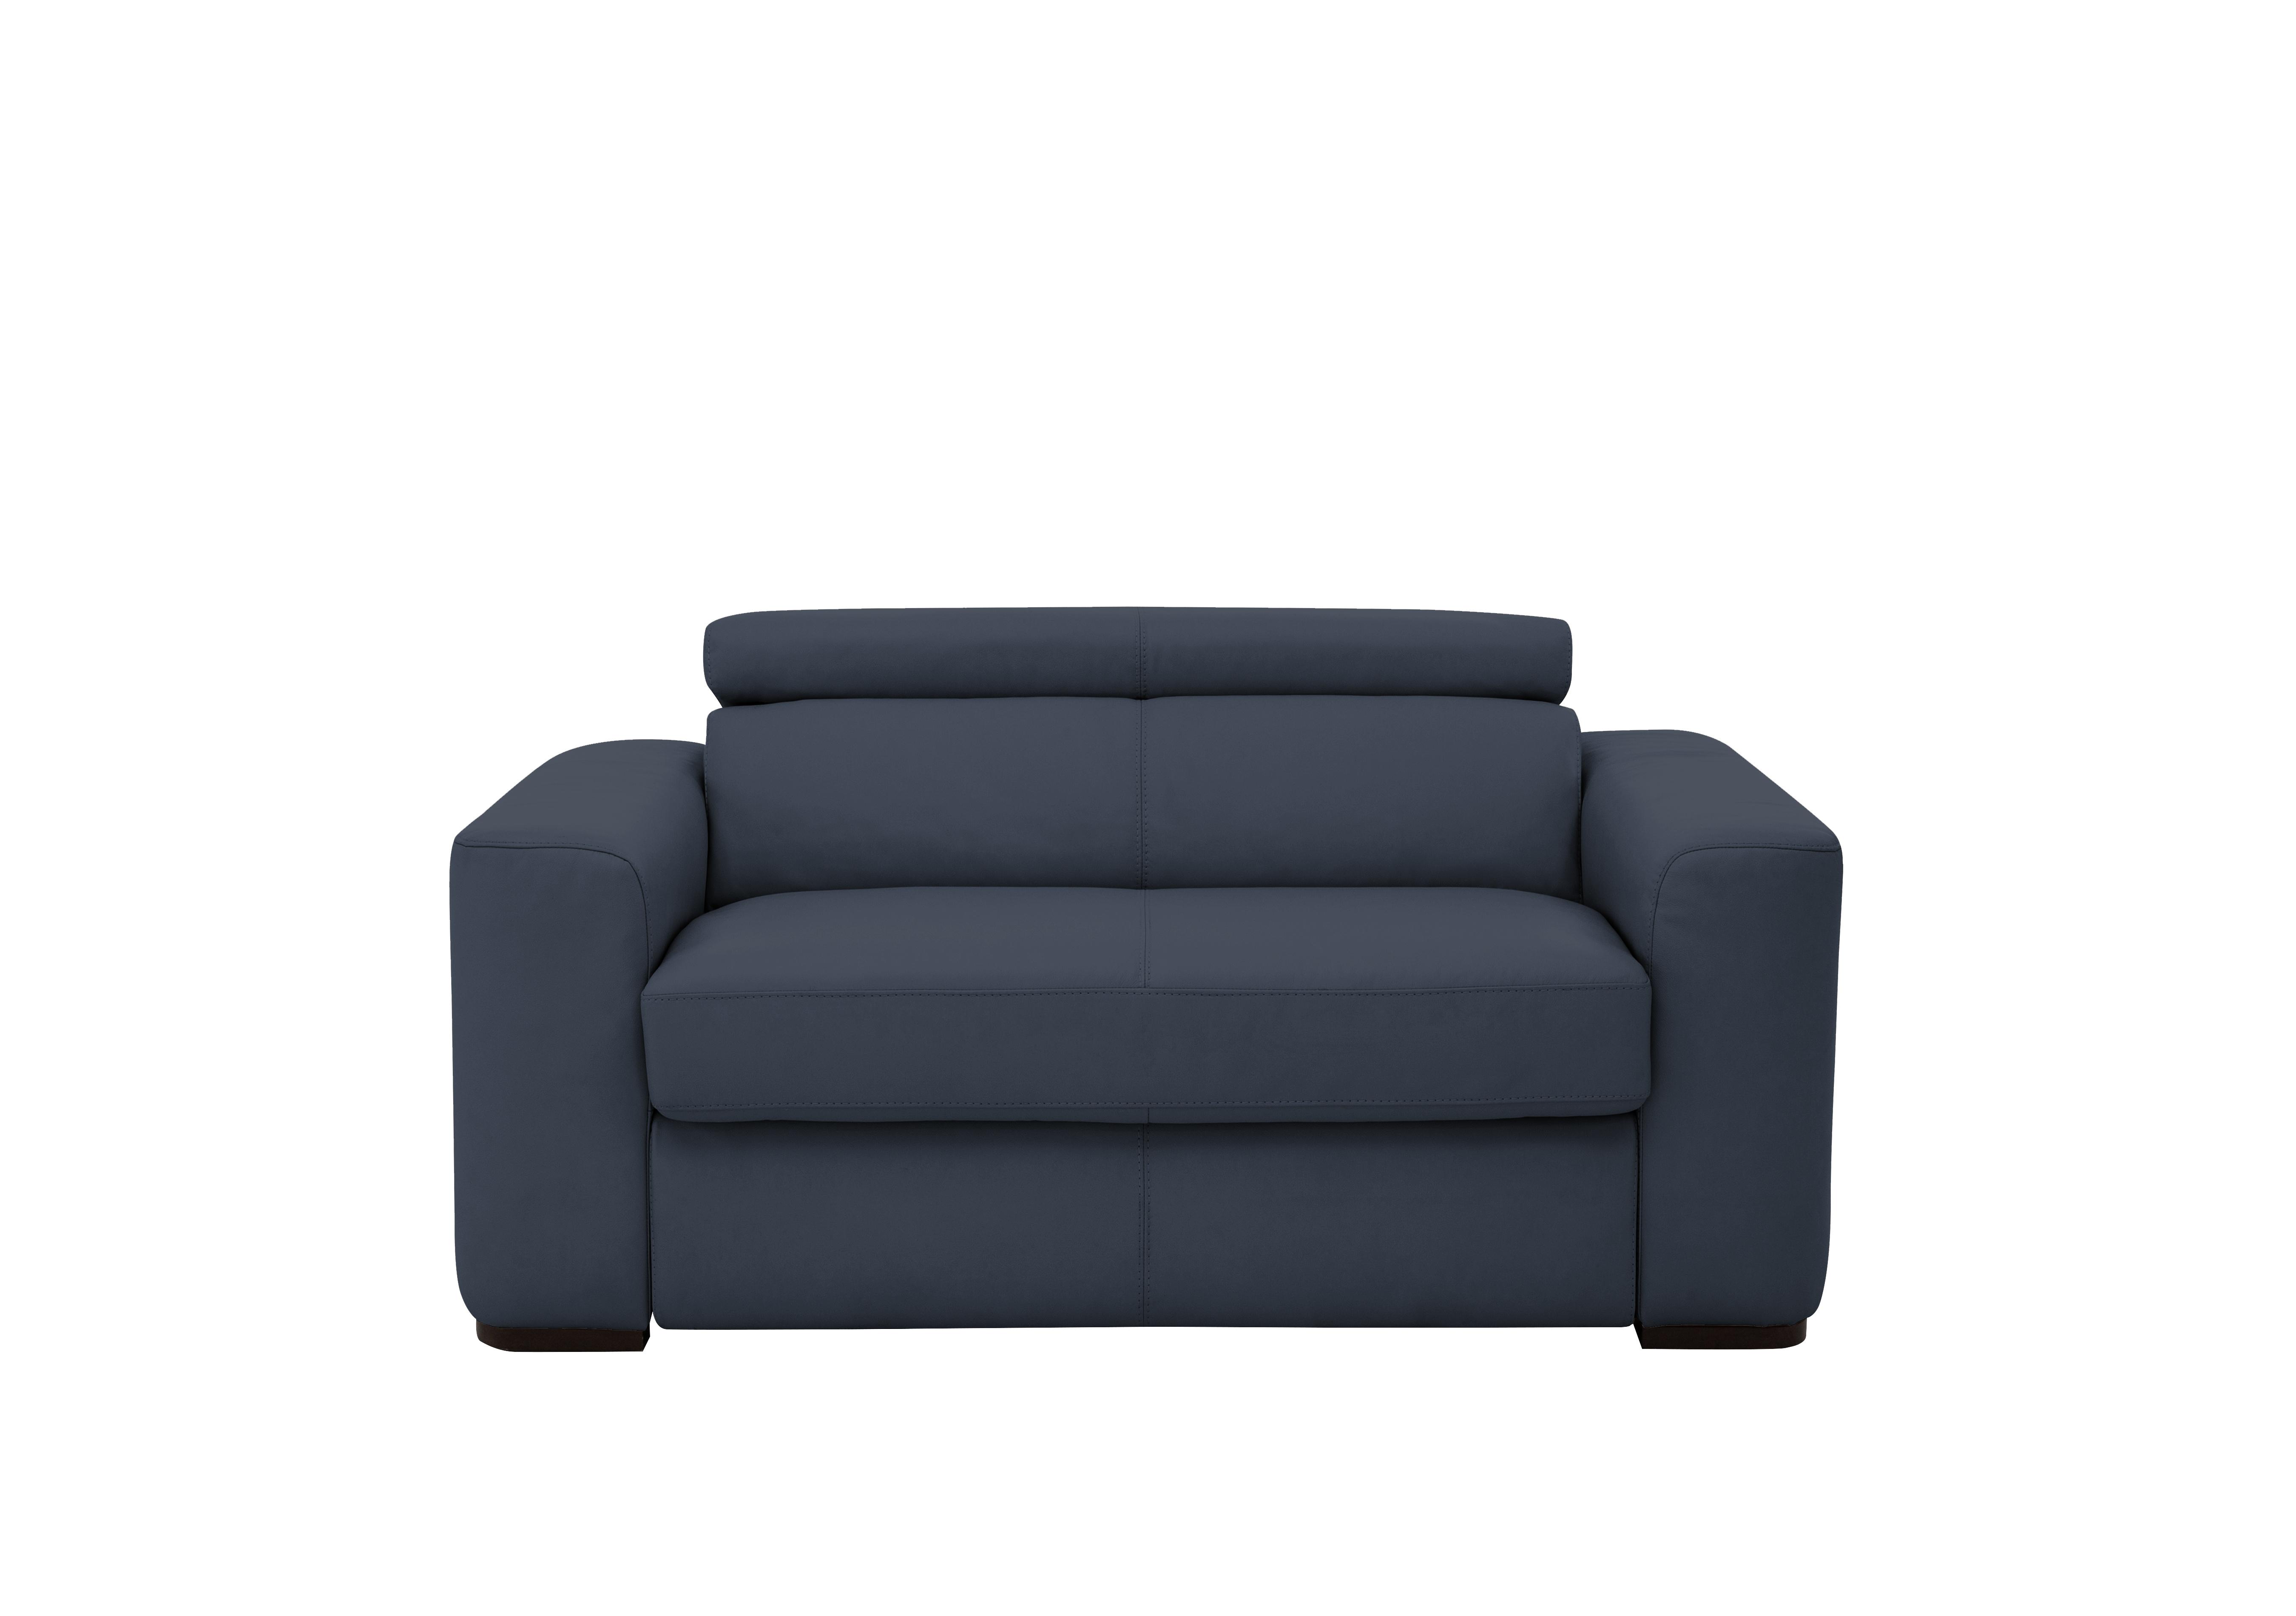 Infinity Leather Chair Sofabed in Bv-313e Ocean Blue on Furniture Village